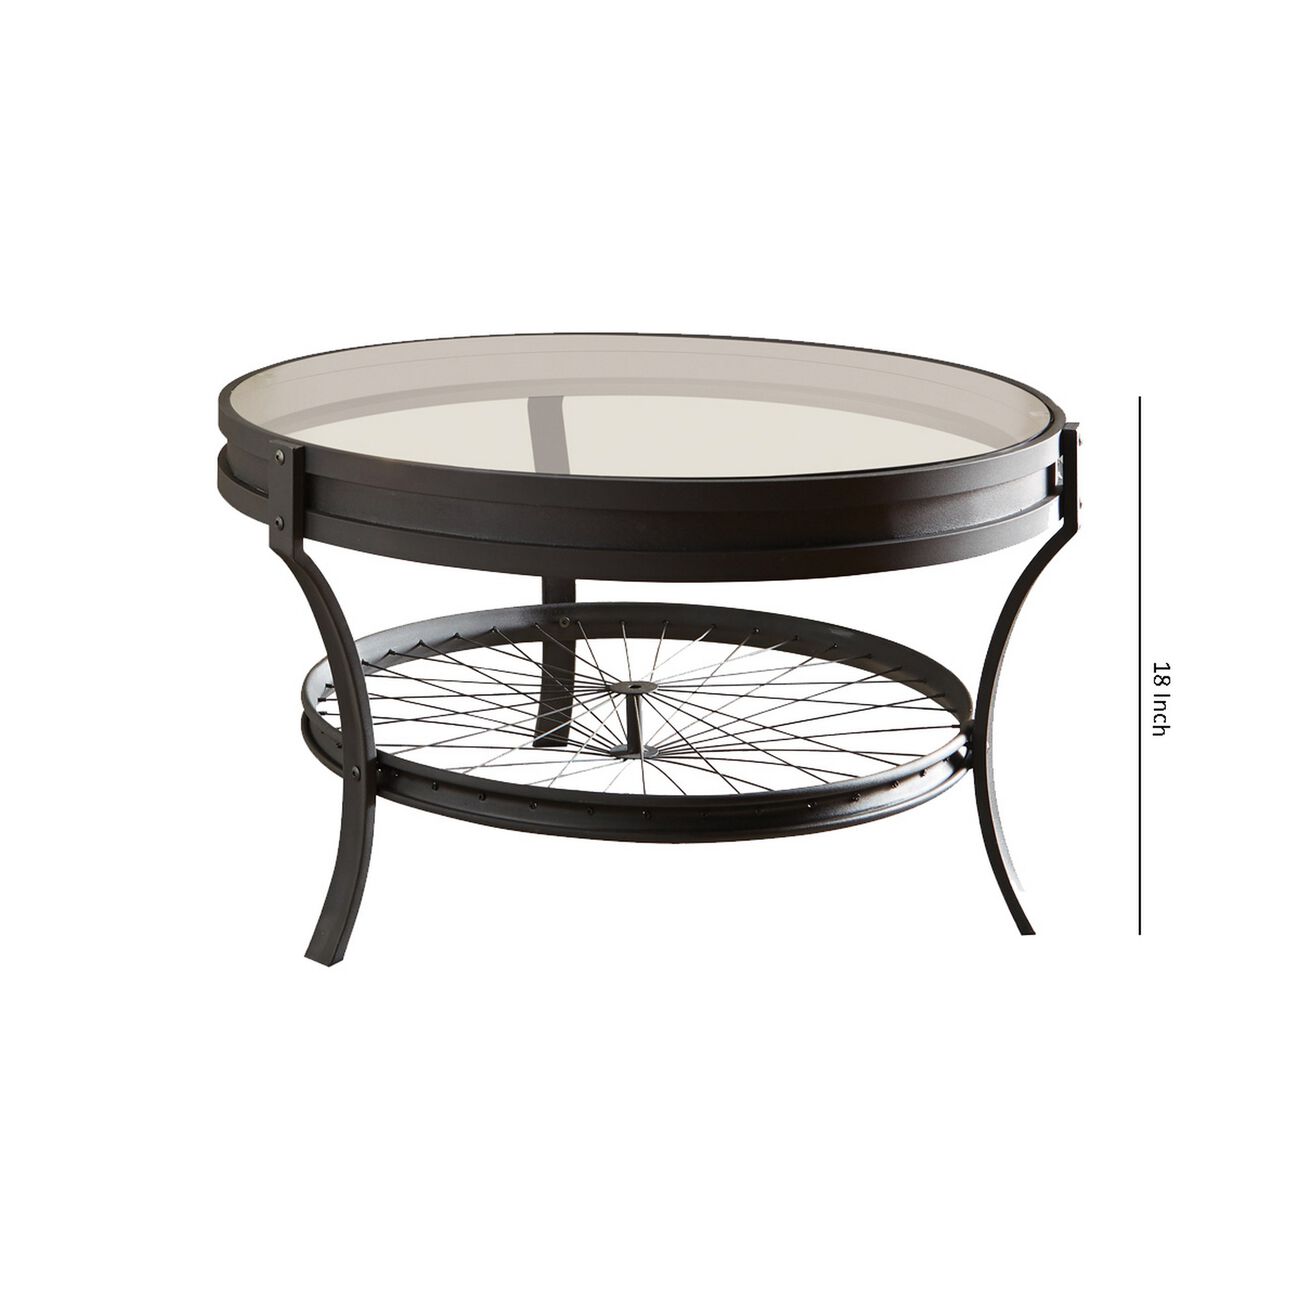 Glass Top Metal Coffee Table with Bike Spokes Design Bottom,Black and Clear